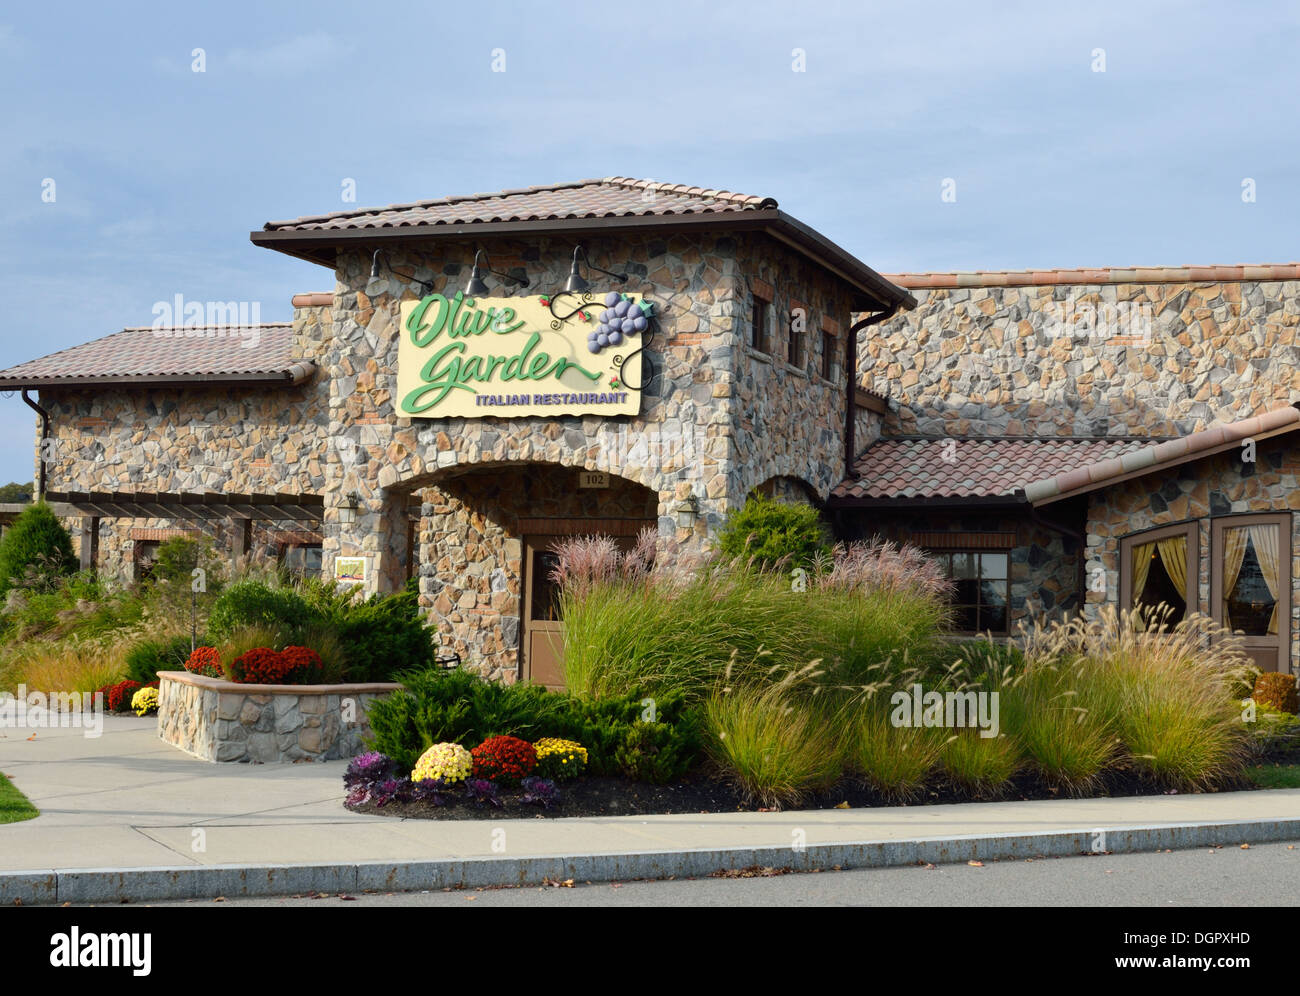 Exterior Entrance Of Olive Garden Restaurant With Sign Plymouth